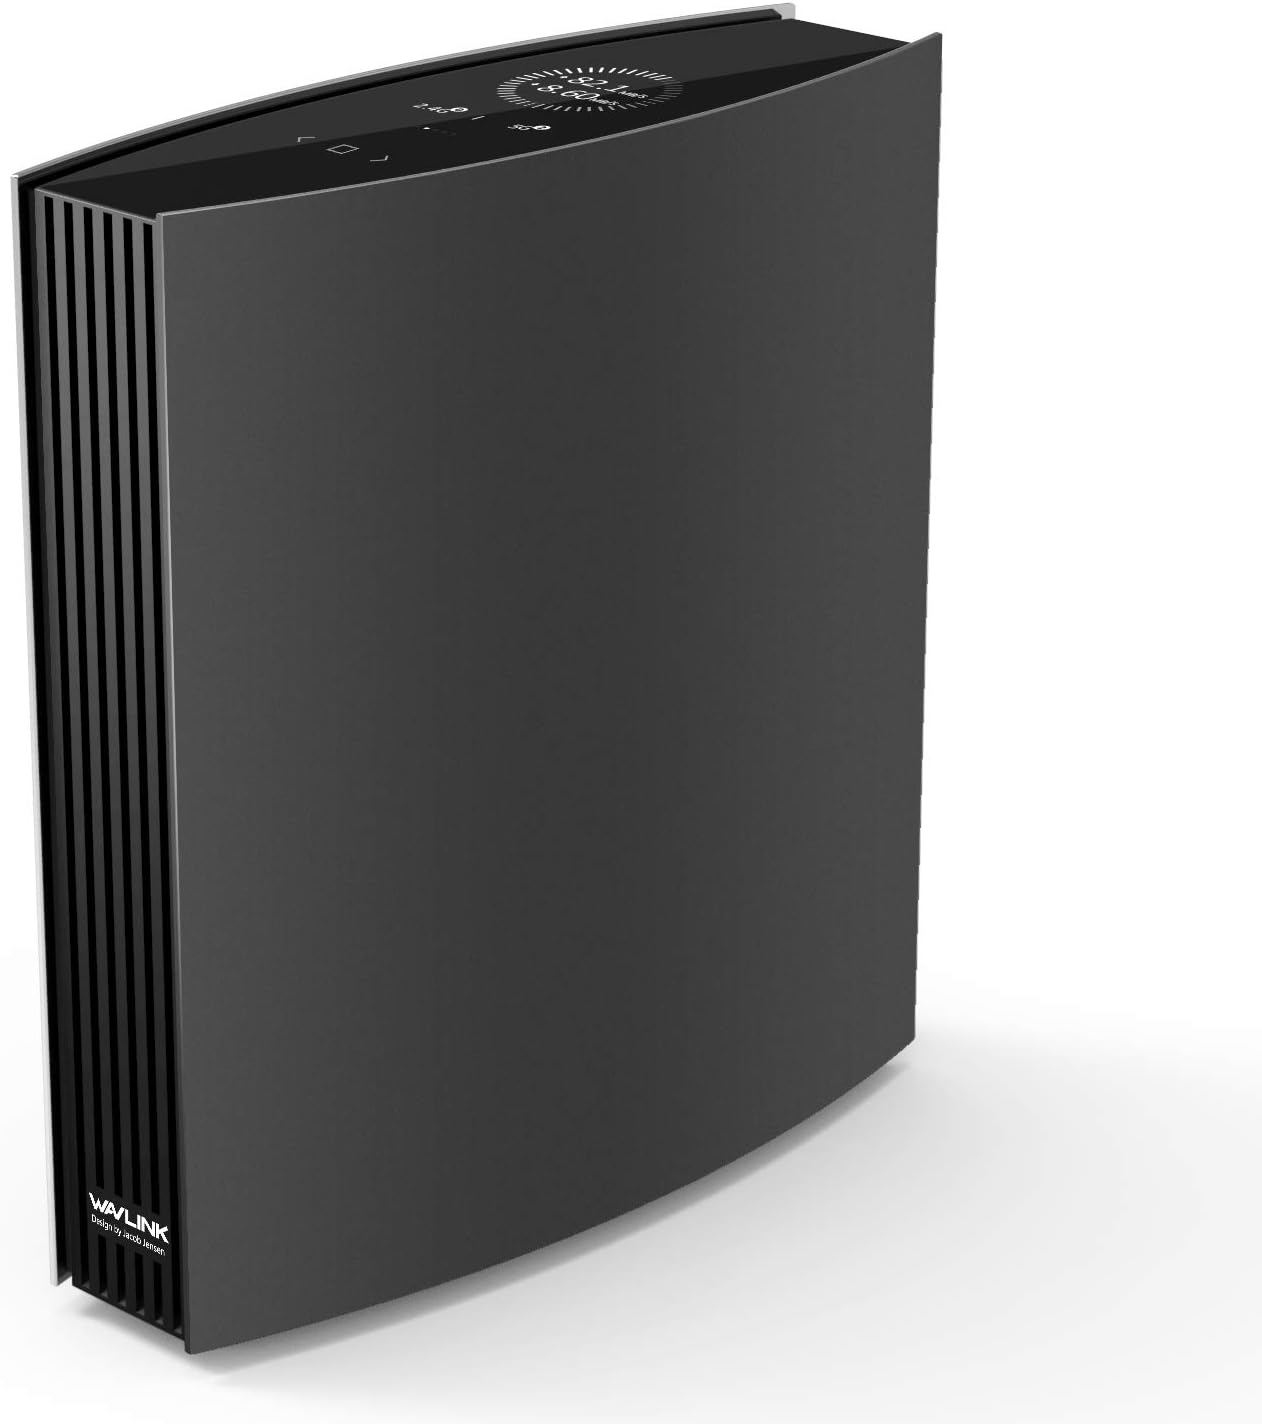 WAVLINK AC3200 Dual Band WiFi Router,Smart Gigabit Router - $55